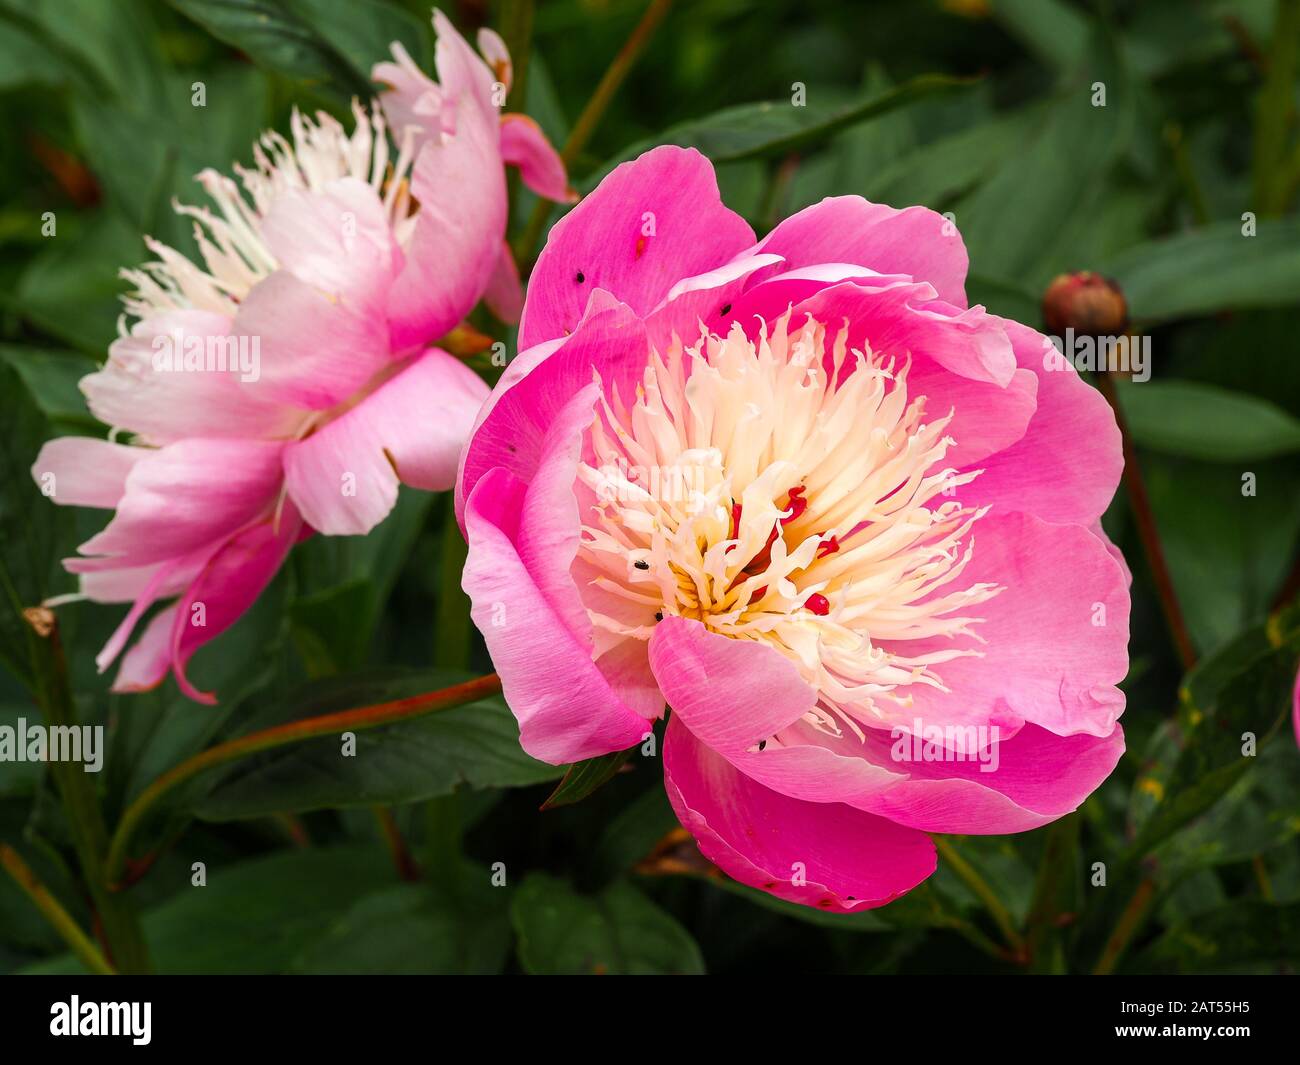 Closeup of beautiful pink peony flowers, Paeonia lactiflora Bowl of Beauty, in a summer garden Stock Photo